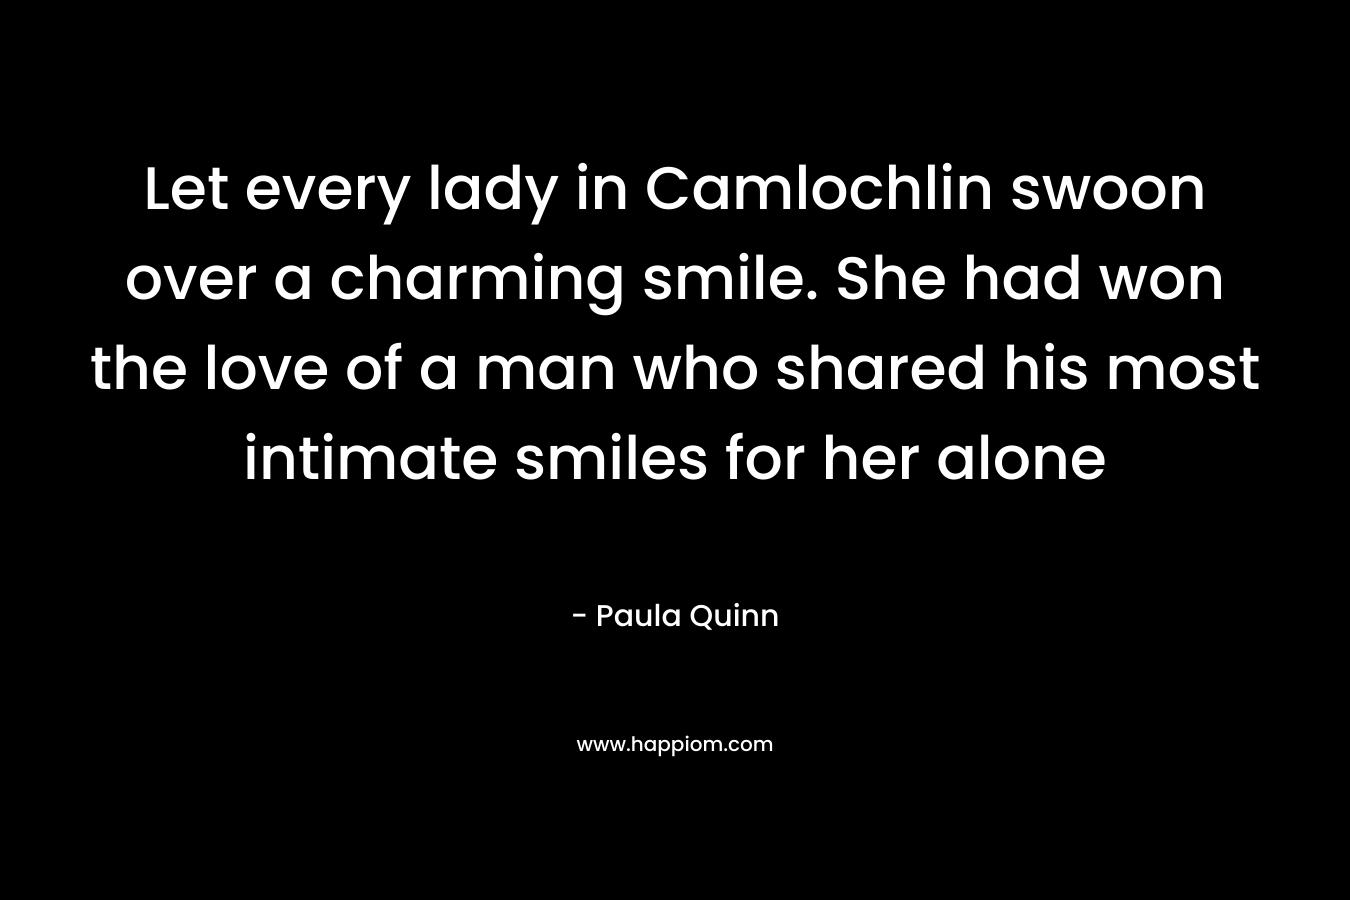 Let every lady in Camlochlin swoon over a charming smile. She had won the love of a man who shared his most intimate smiles for her alone